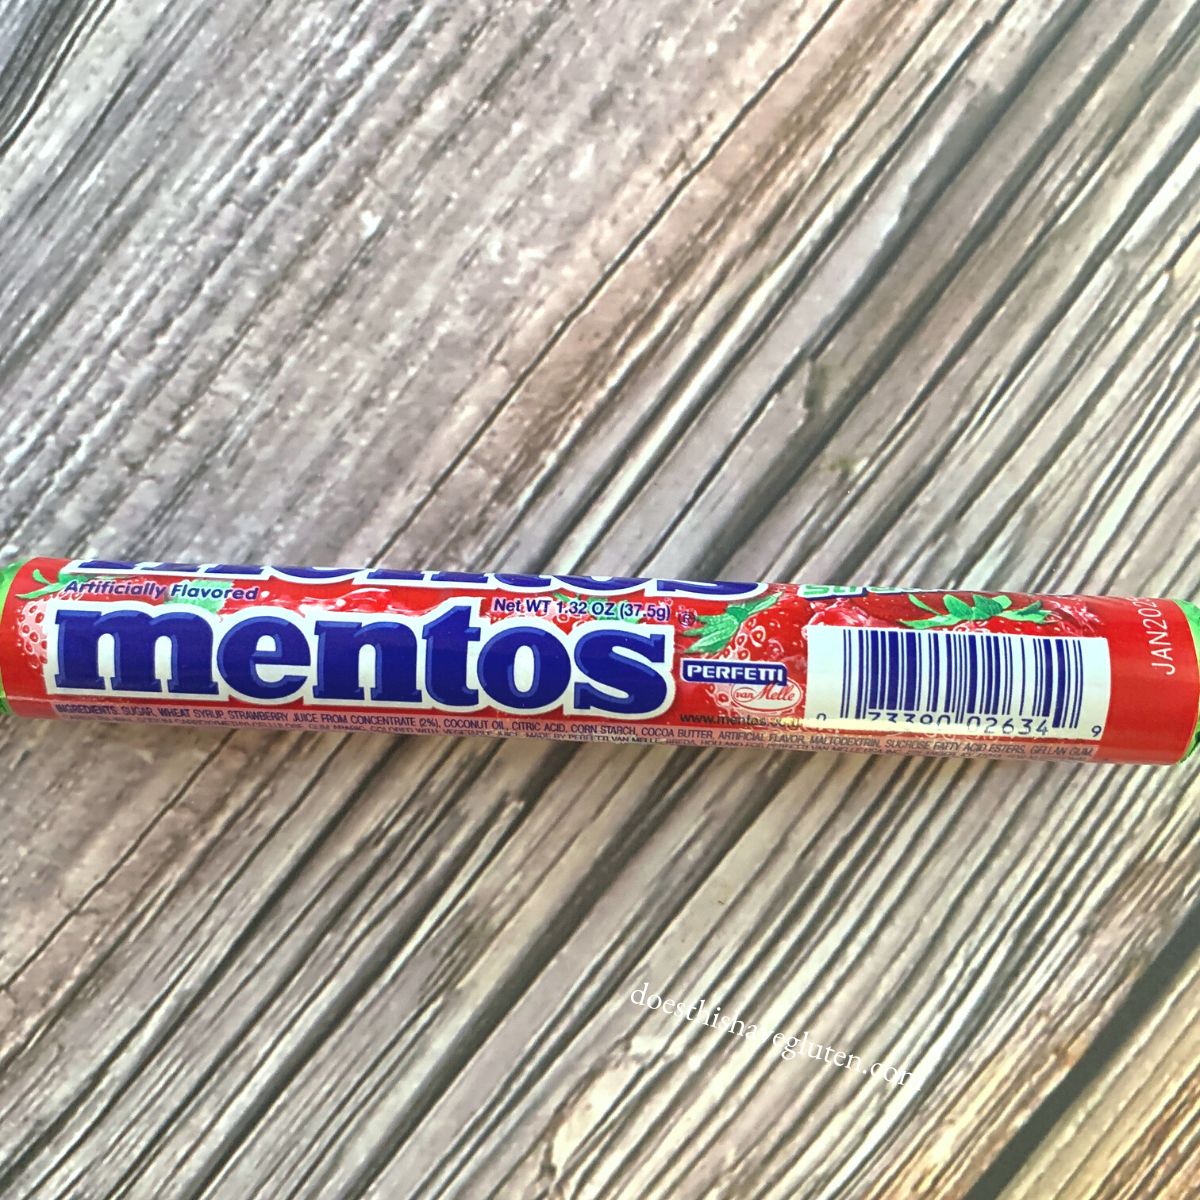 A roll of fruit mentos on a table.